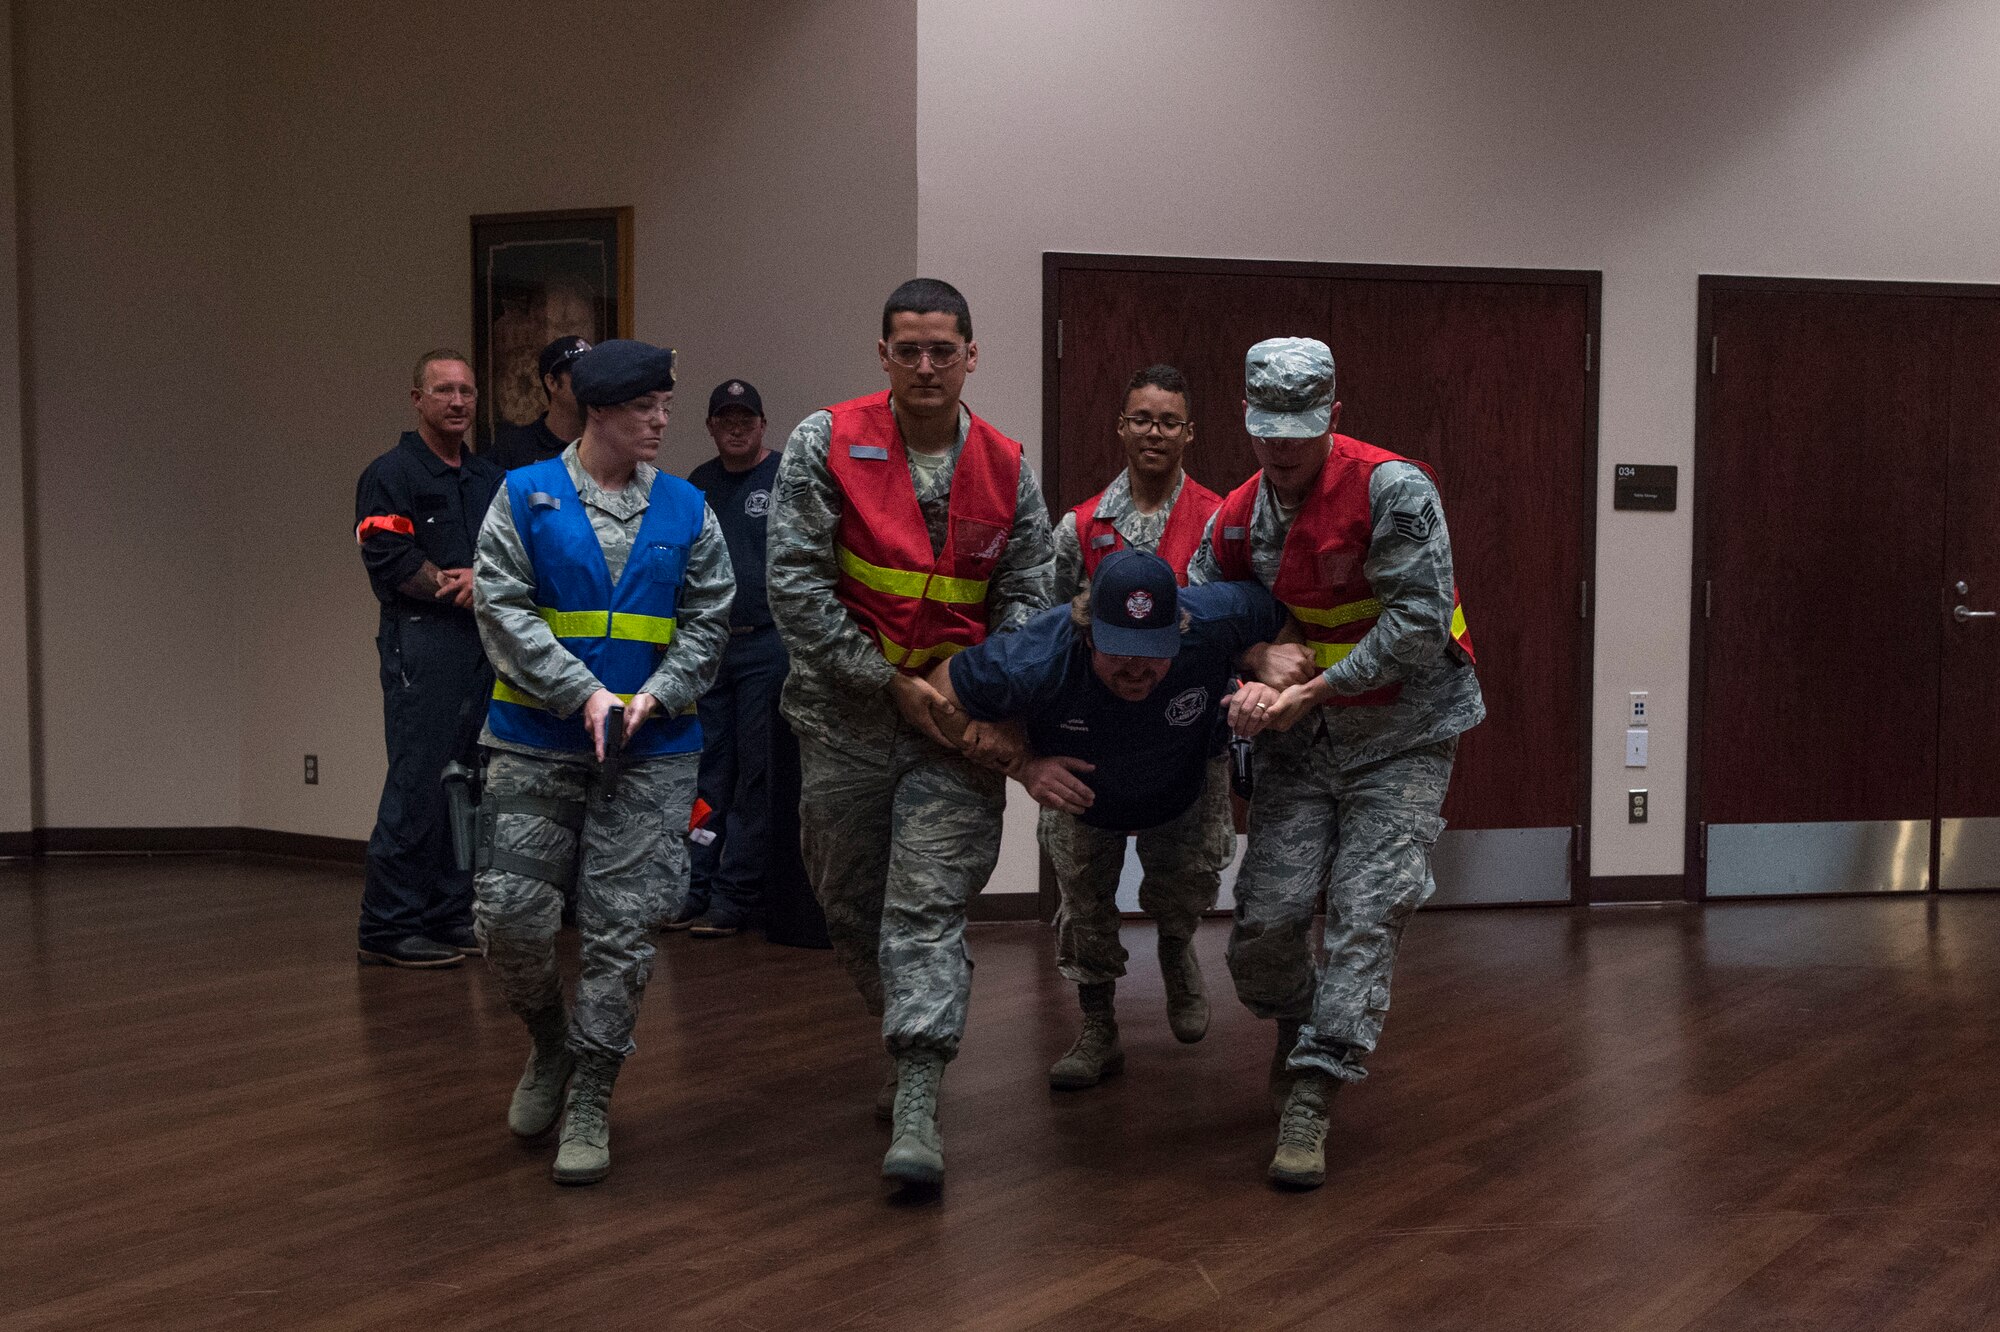 Altus Air Force Base fire fighters evacuate an injured victim, during Advanced Law Enforcement Rapid Response Training, June 19, 2018, at Altus AFB, Okla.